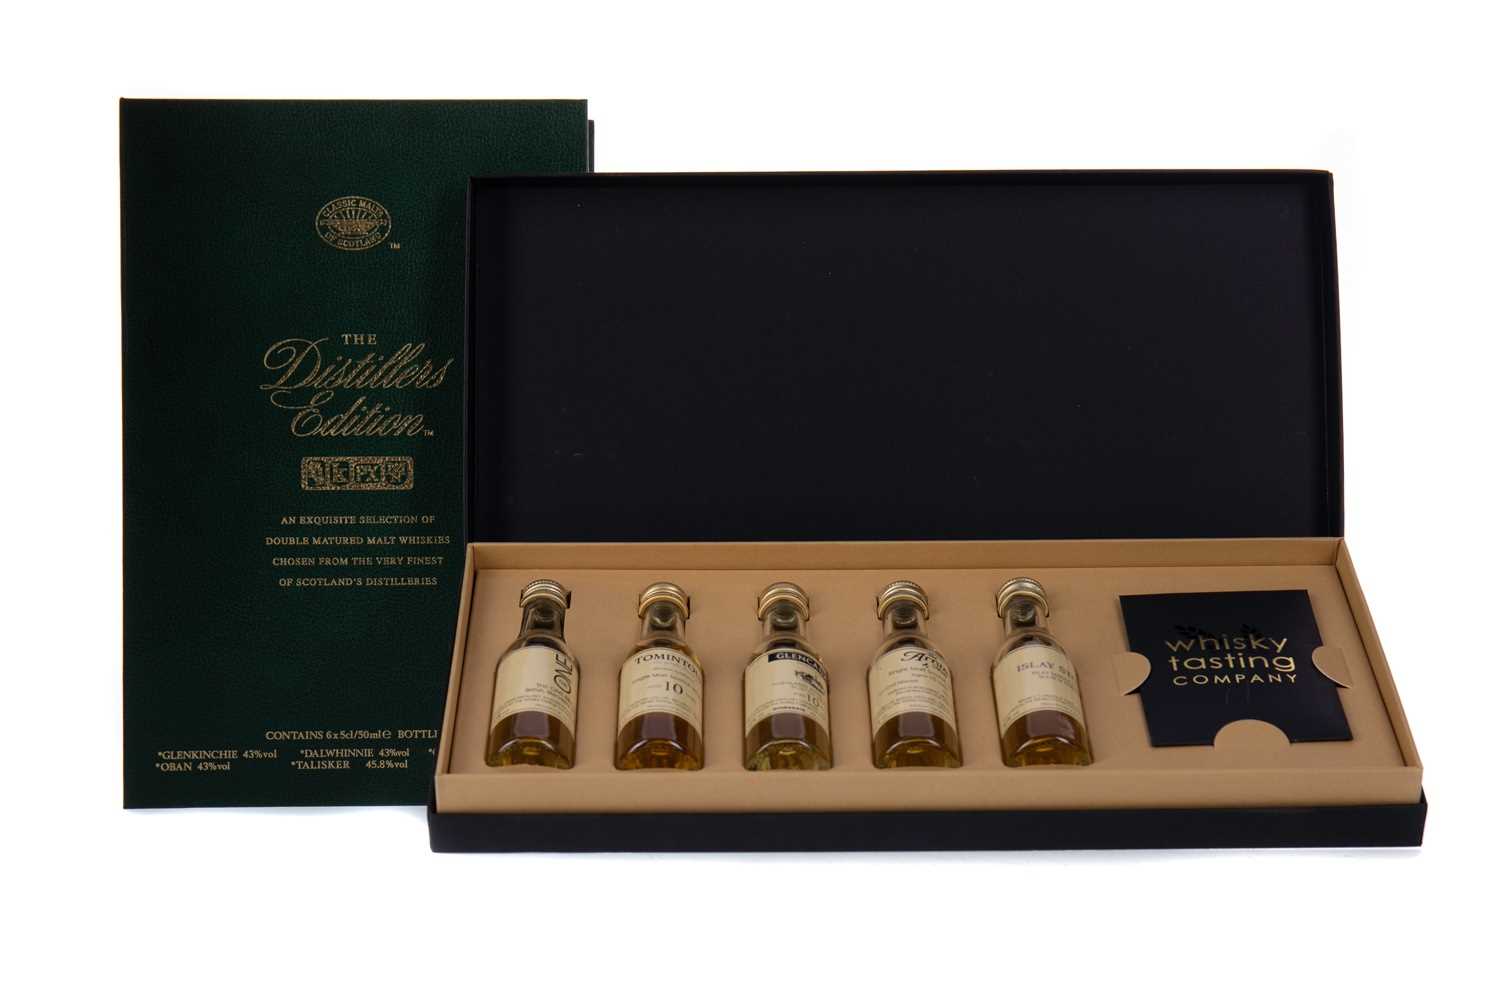 Lot 26 - CLASSIC MALTS OF SCOTLAND DISTILLERS EDITION MINIATURE SET AND WHISKY TASTING COMPANY SET